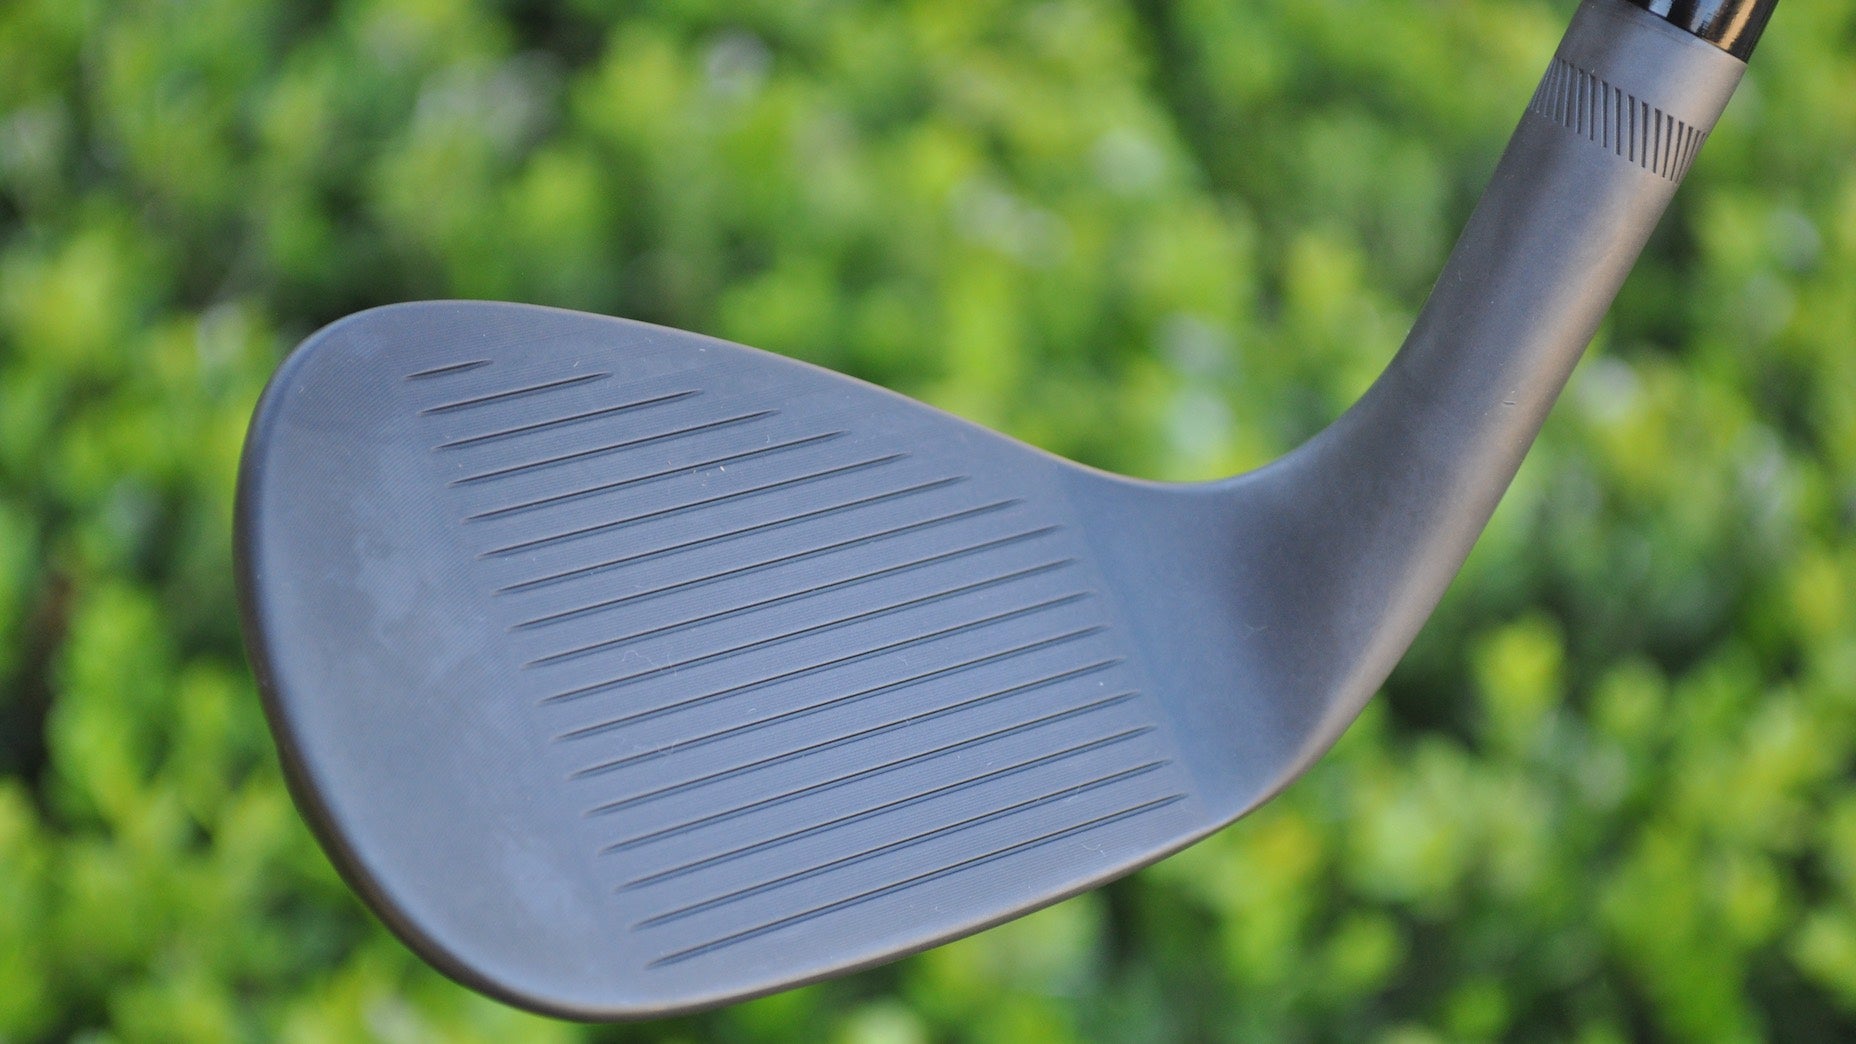 Is it time for new wedges? Keep these 5 